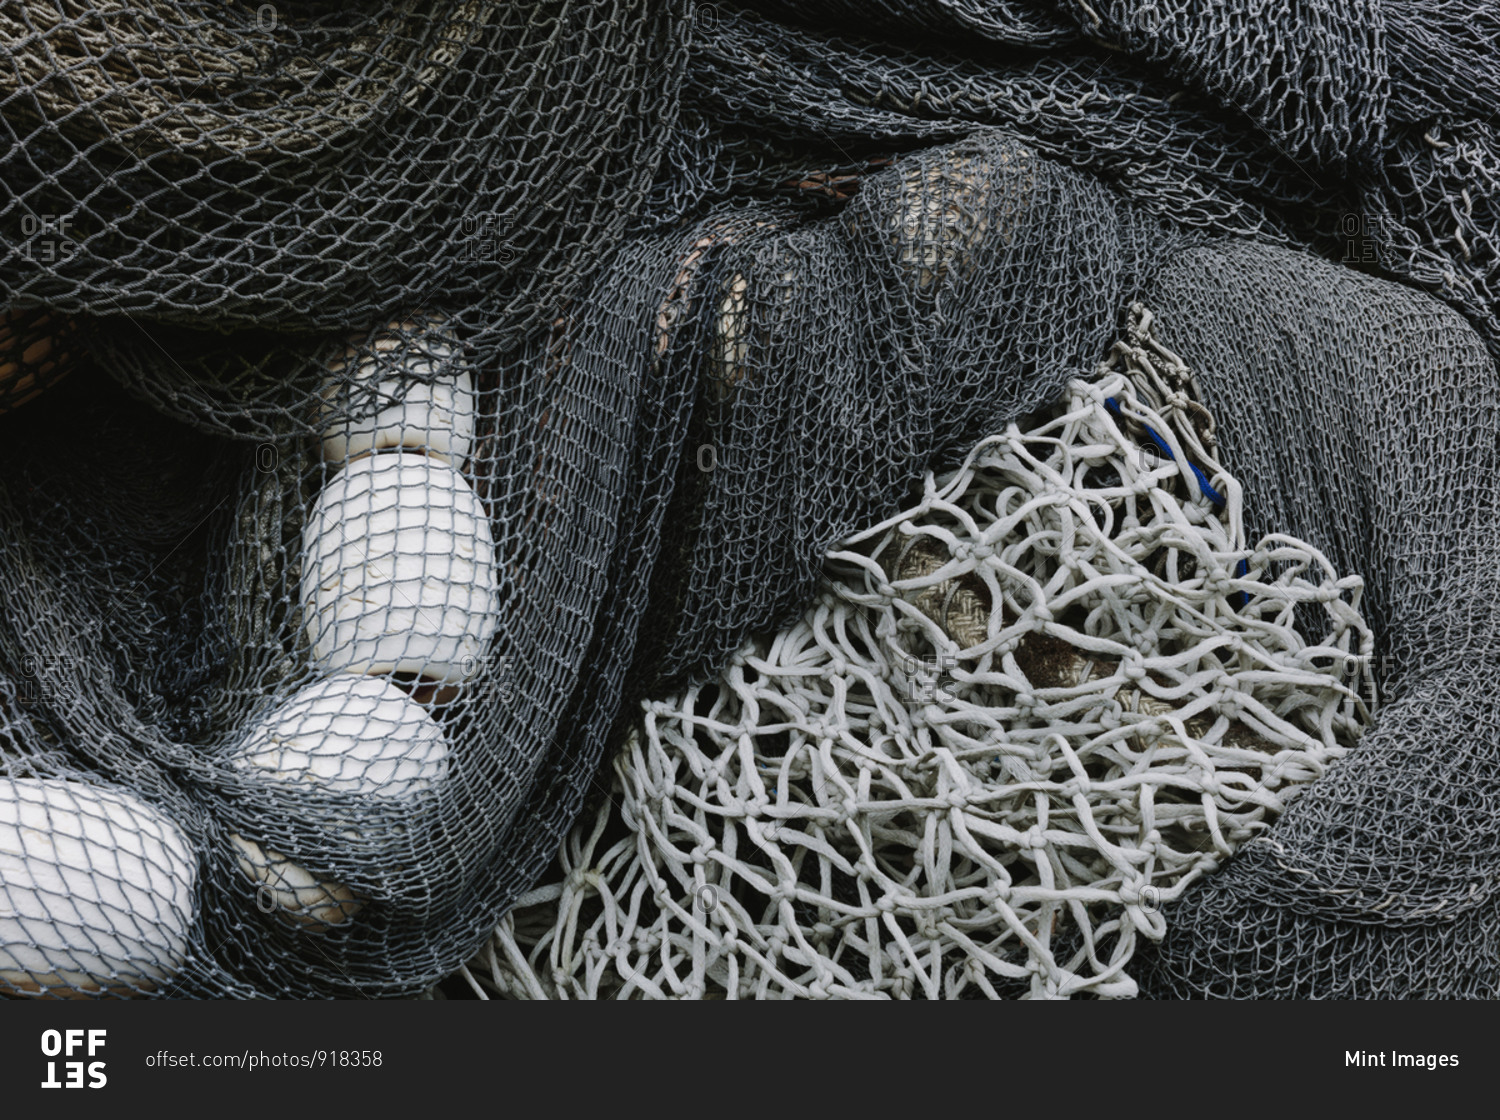 Pile of commercial fishing nets and gill nets on a fishing quay.